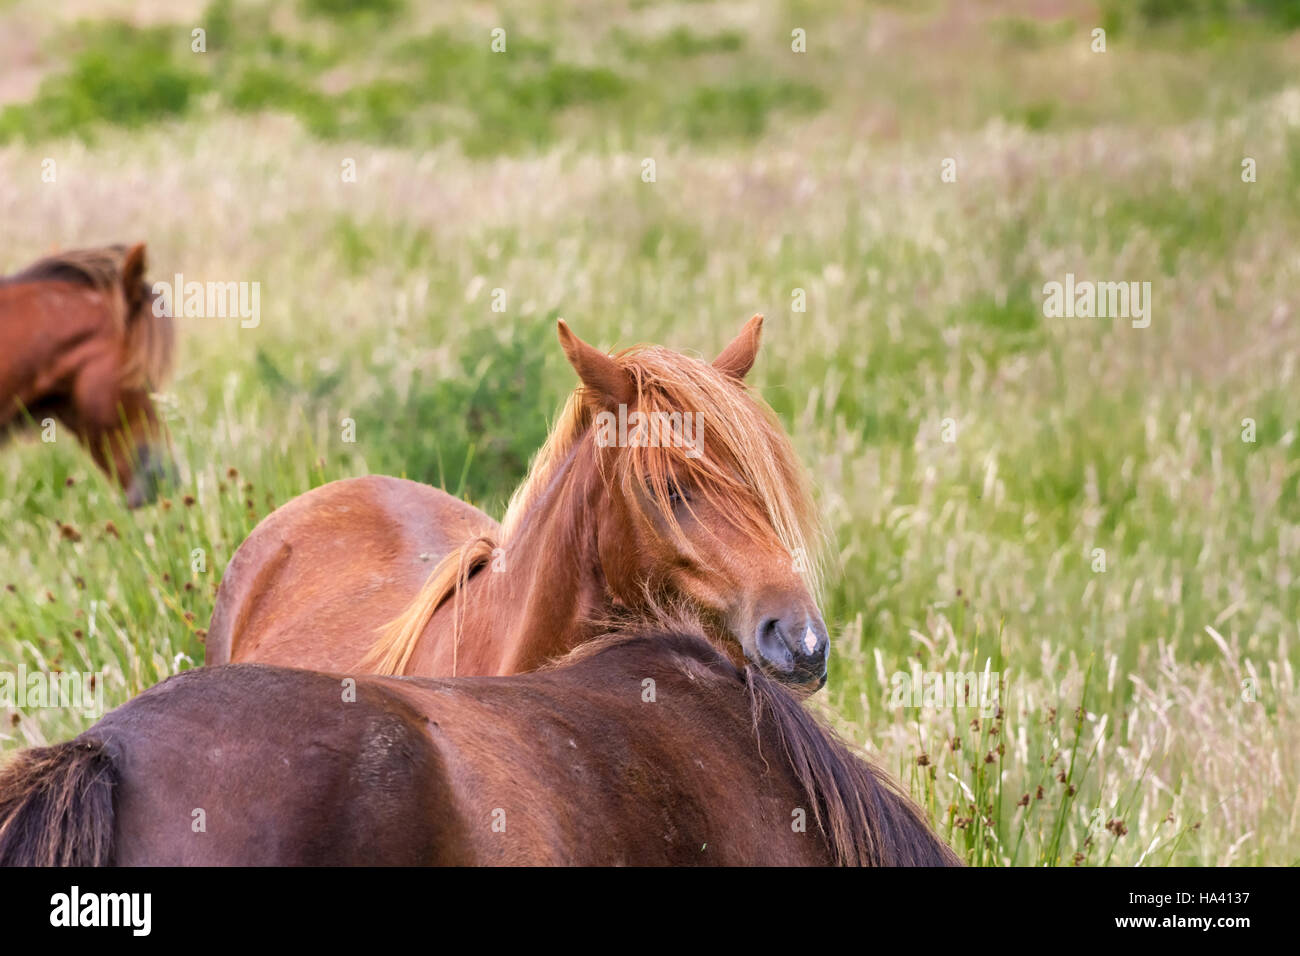 Horse on the pasture peering at the photographer Stock Photo